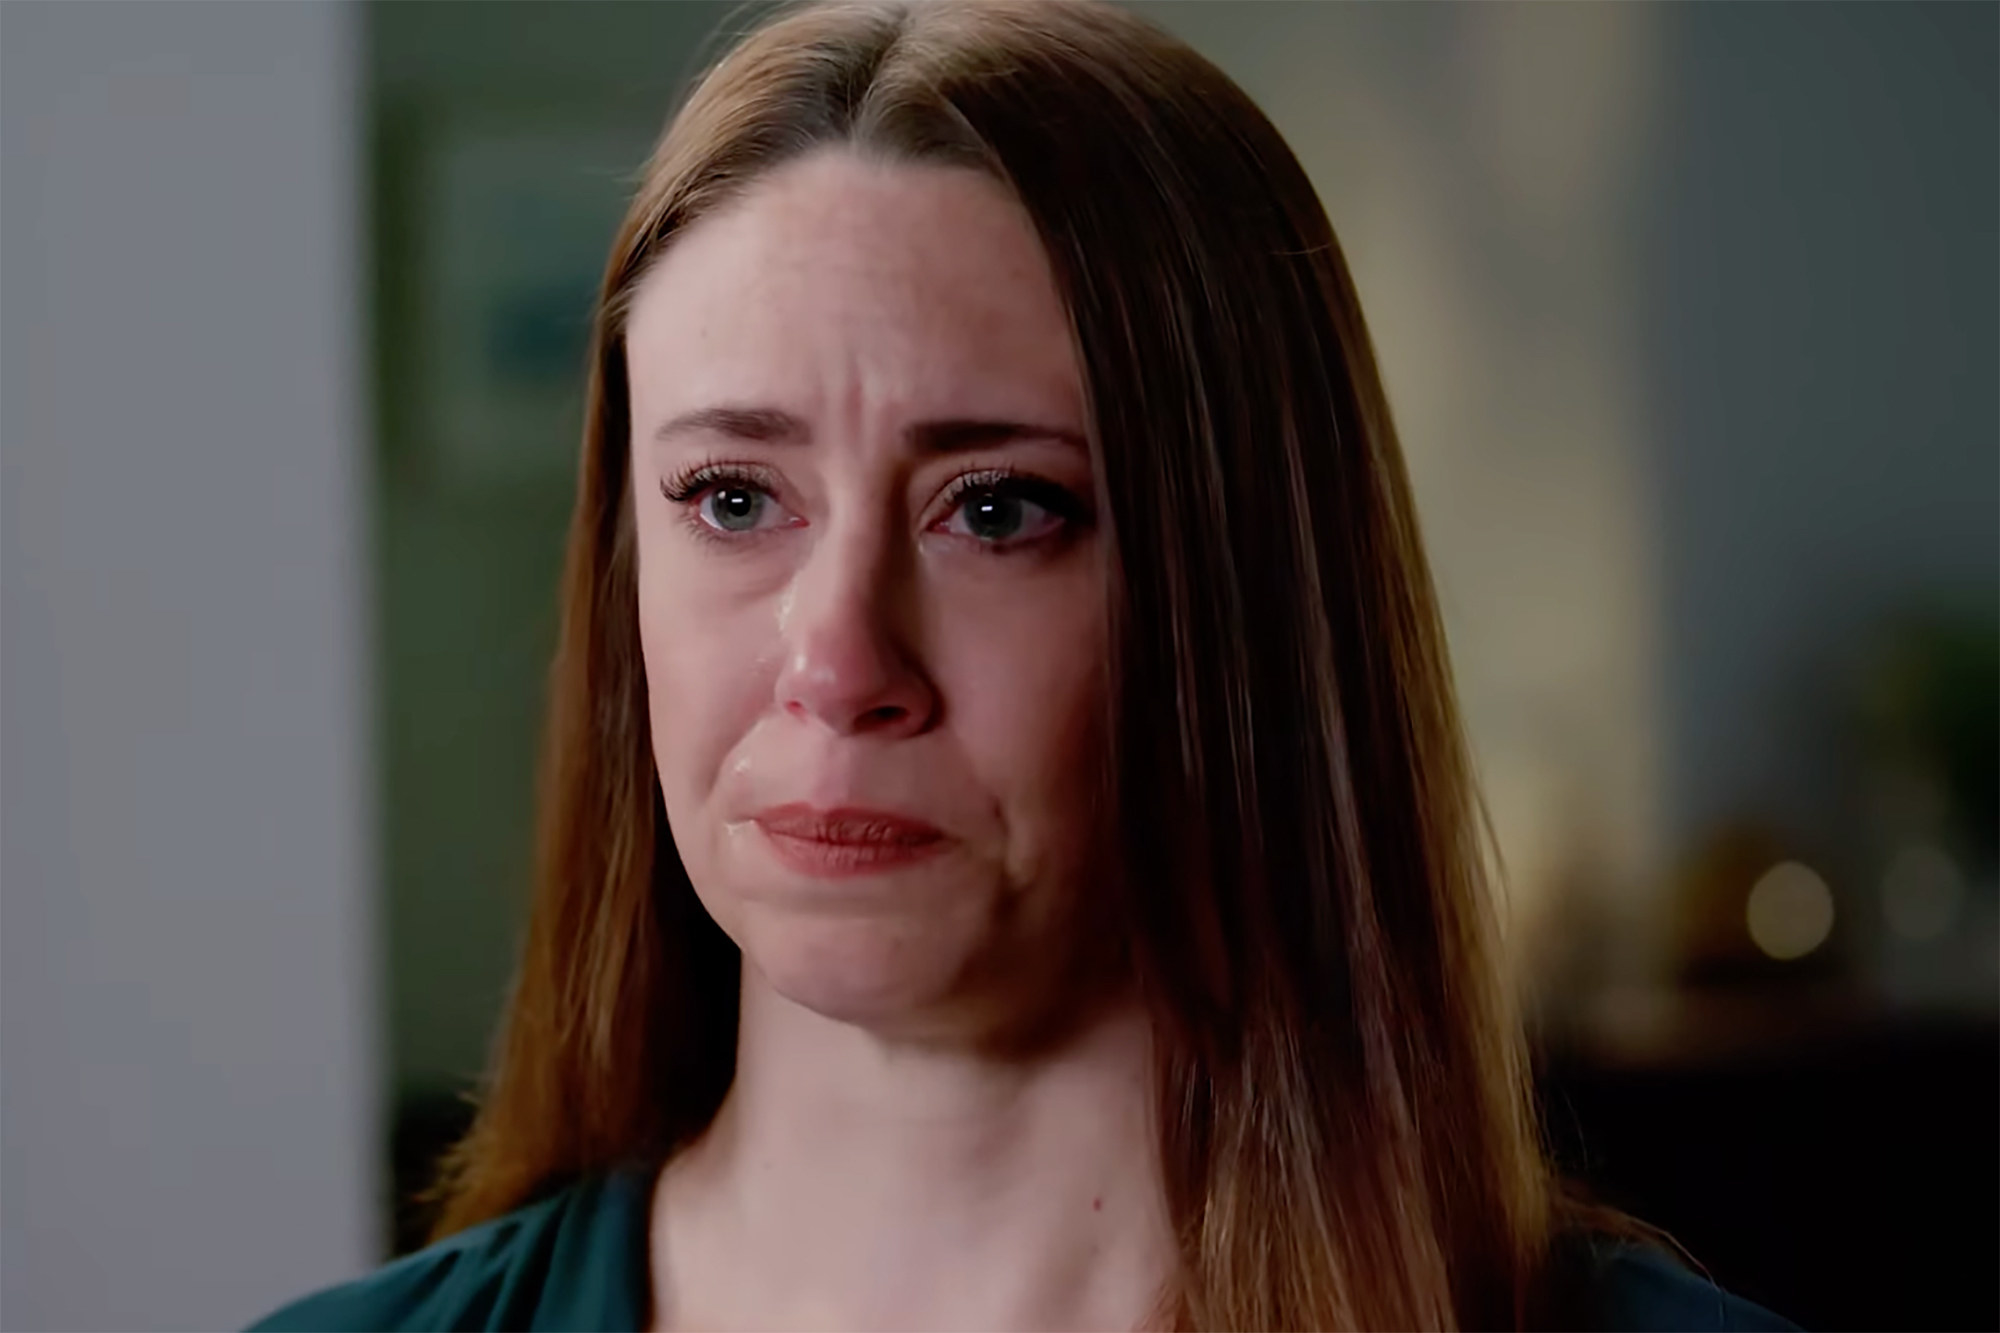 Casey Anthony cries in a close-up on her face in this screenshot from a documentary